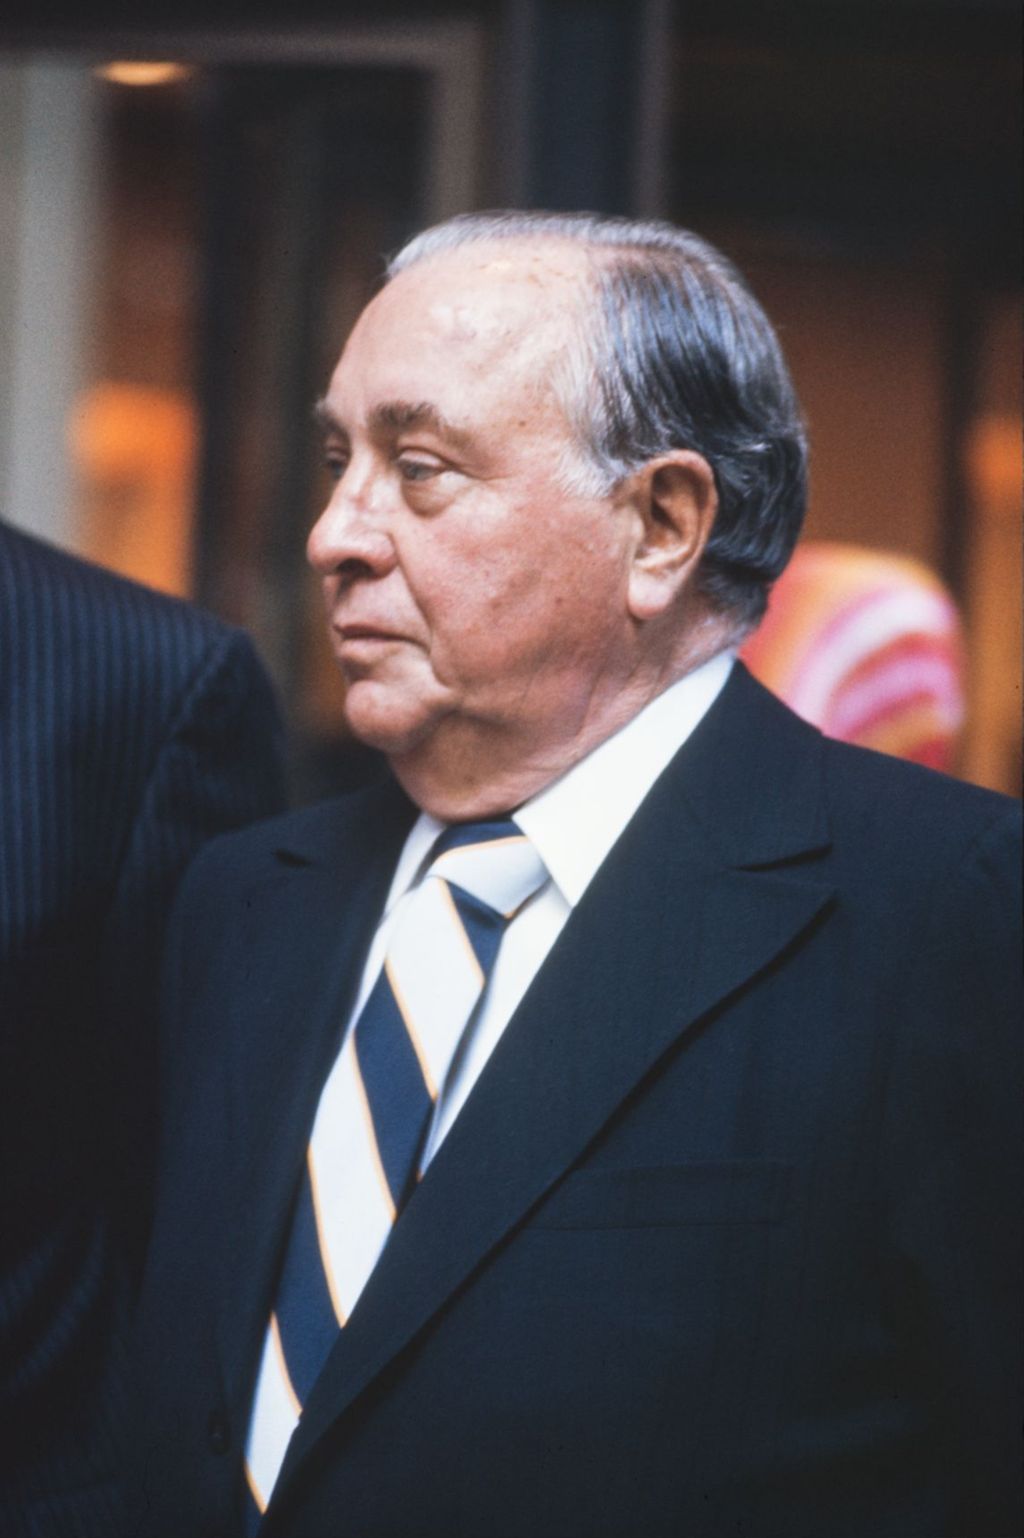 Portraits of Richard J. Daley wearing a navy and white striped tie